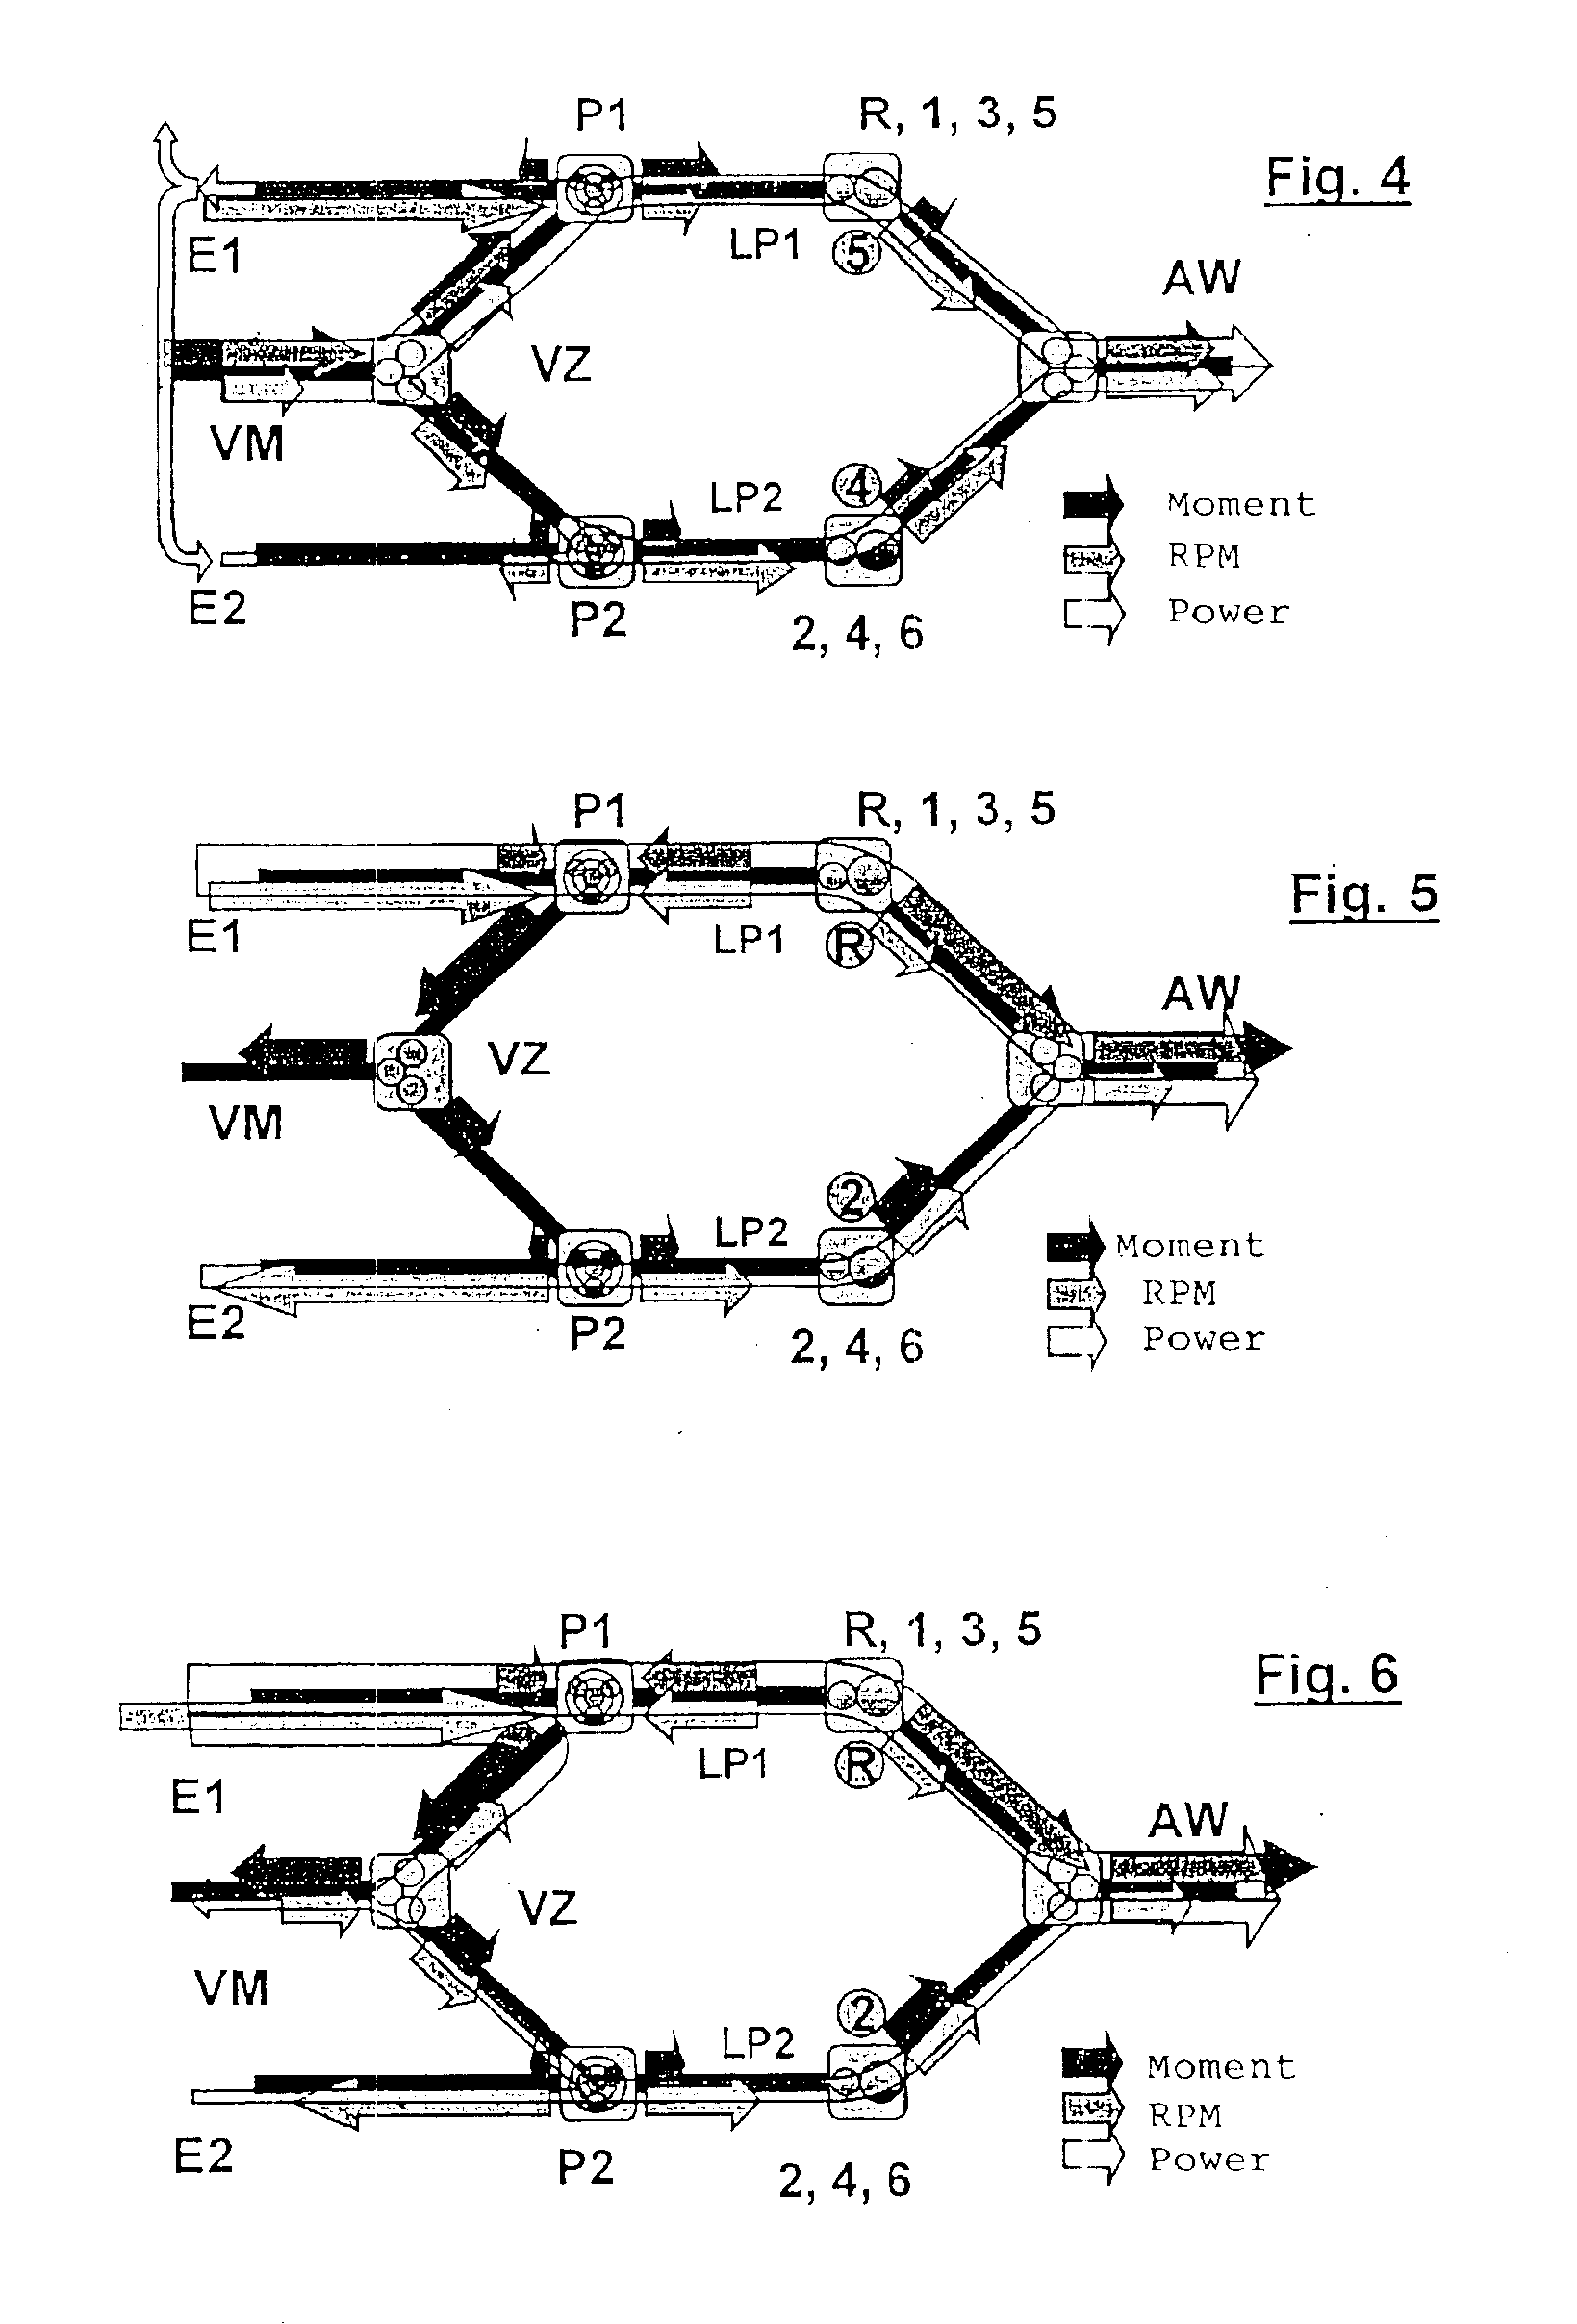 Methods for operating a motor vehicle driven by an internal combustion engine and by two electrical machines